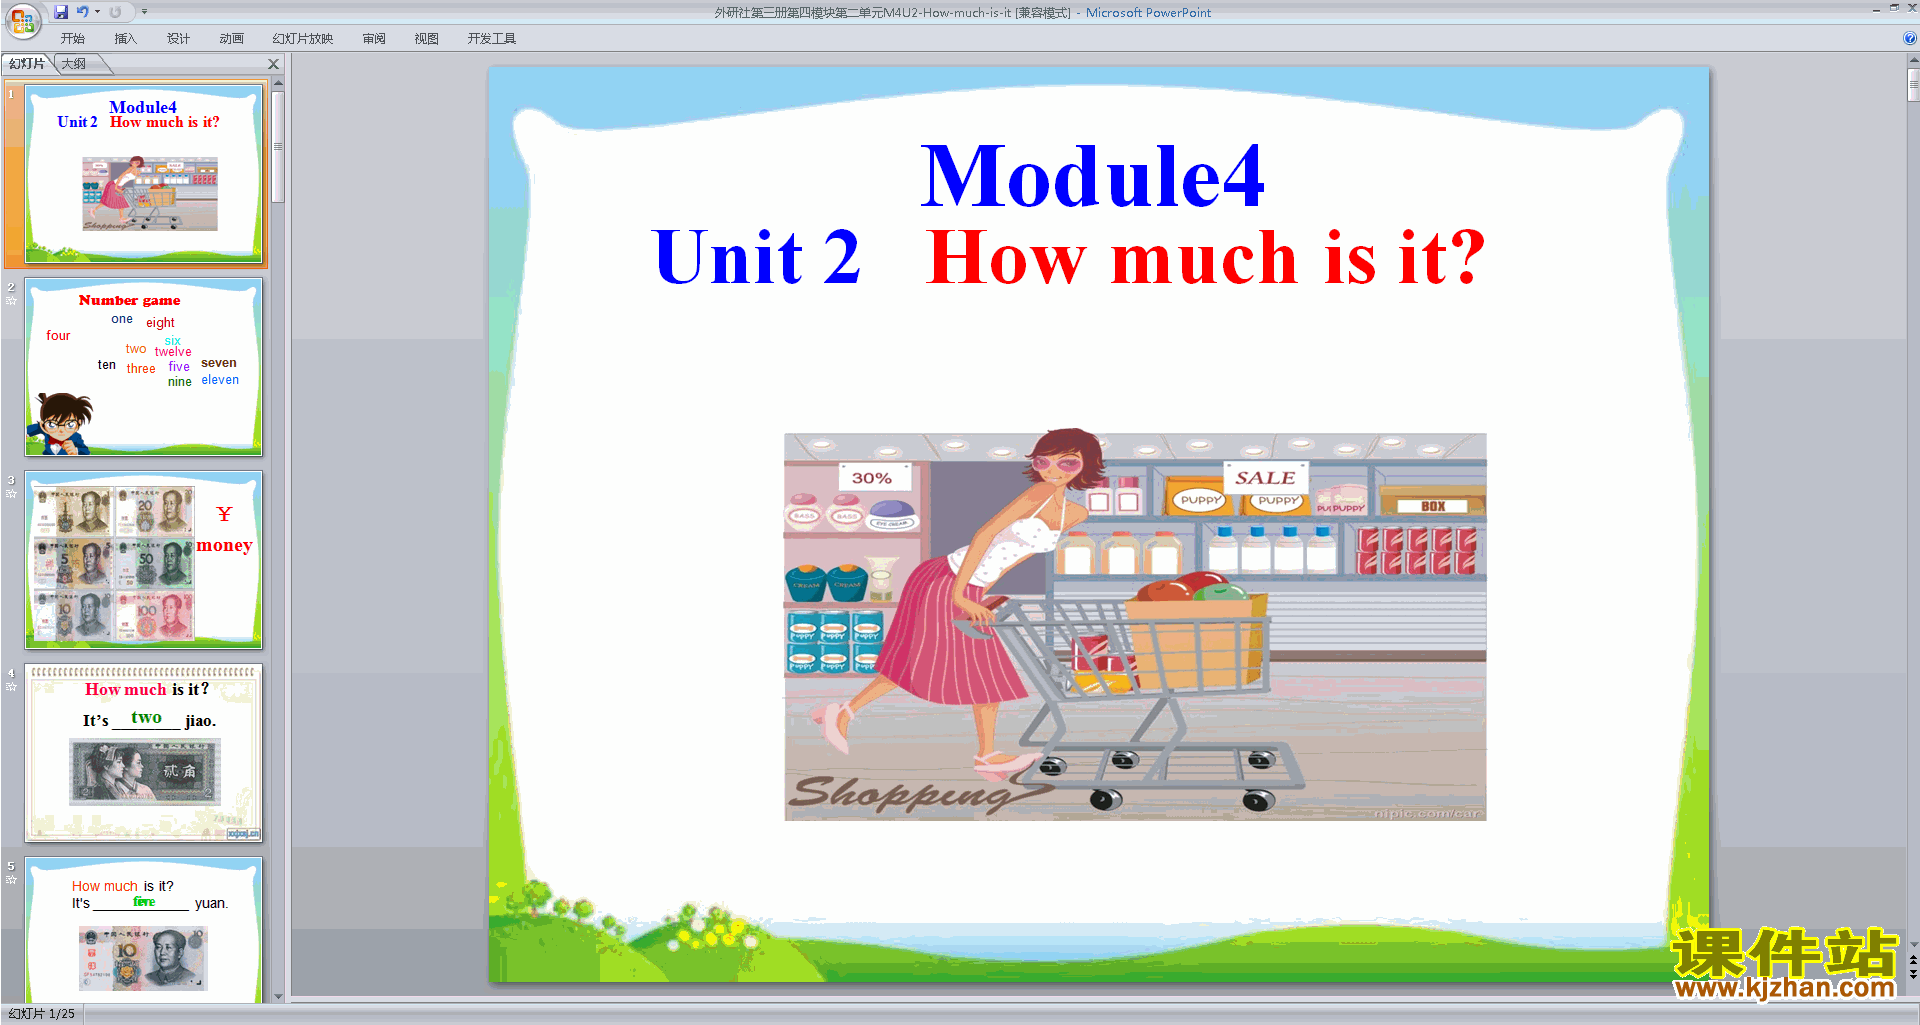 аӢпModule4 Unit2 How much is itpptμ15